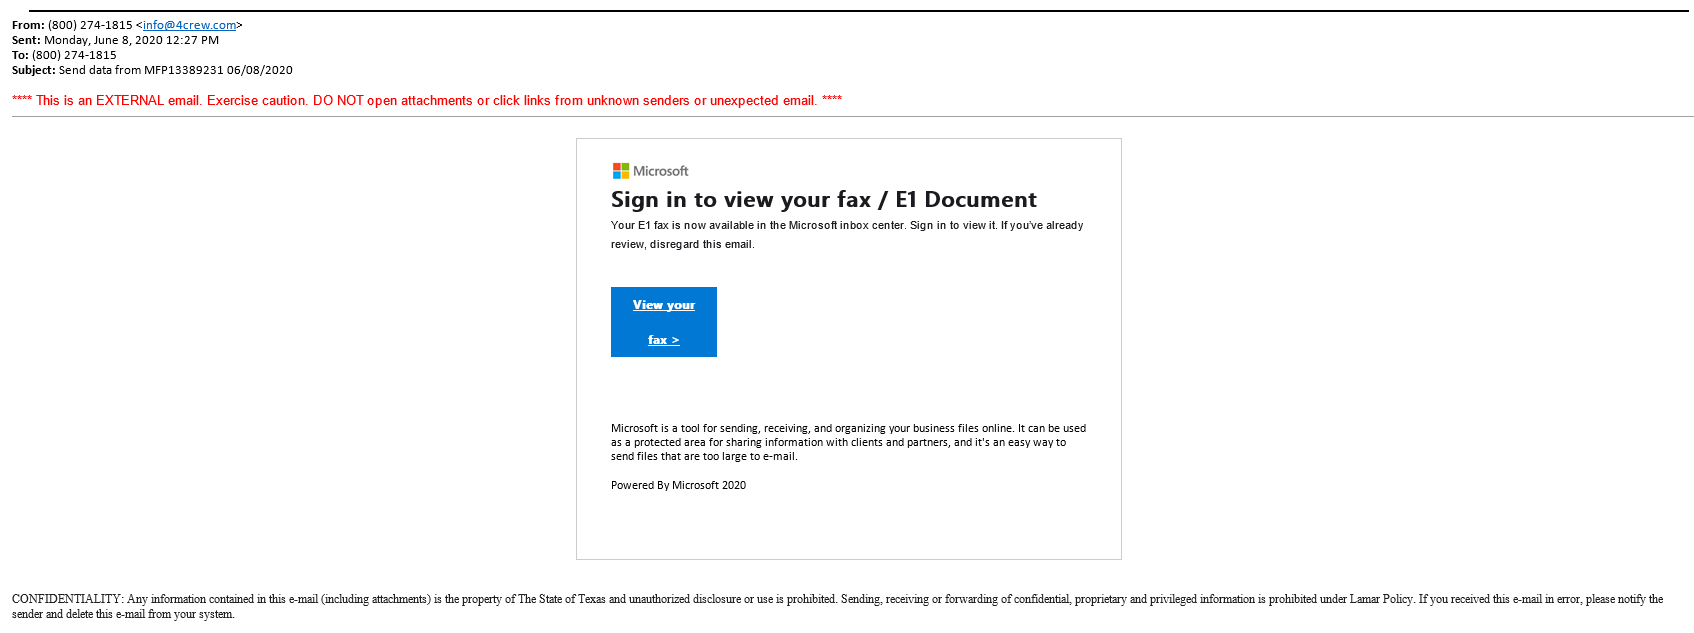 Sign in to view your fax/e1 document. Your E1 fax is now available in Microsoft inbox center. Sign in to view it. If you've already review, disregard this email. View your fax >  